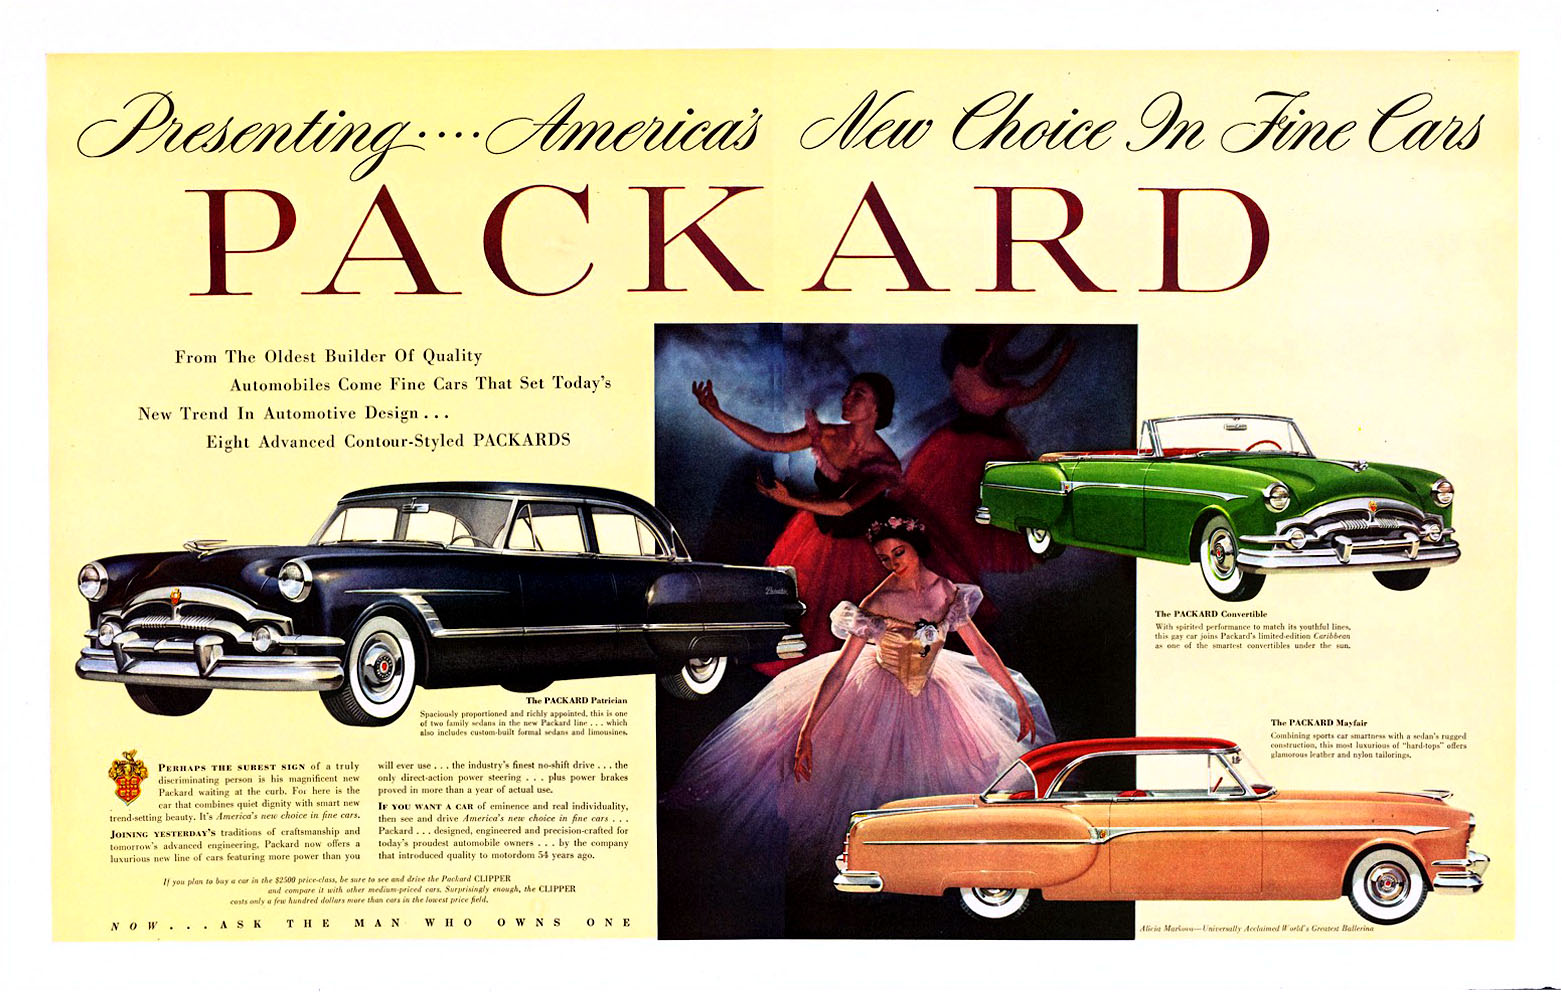 1953 Packard Auto Advertising